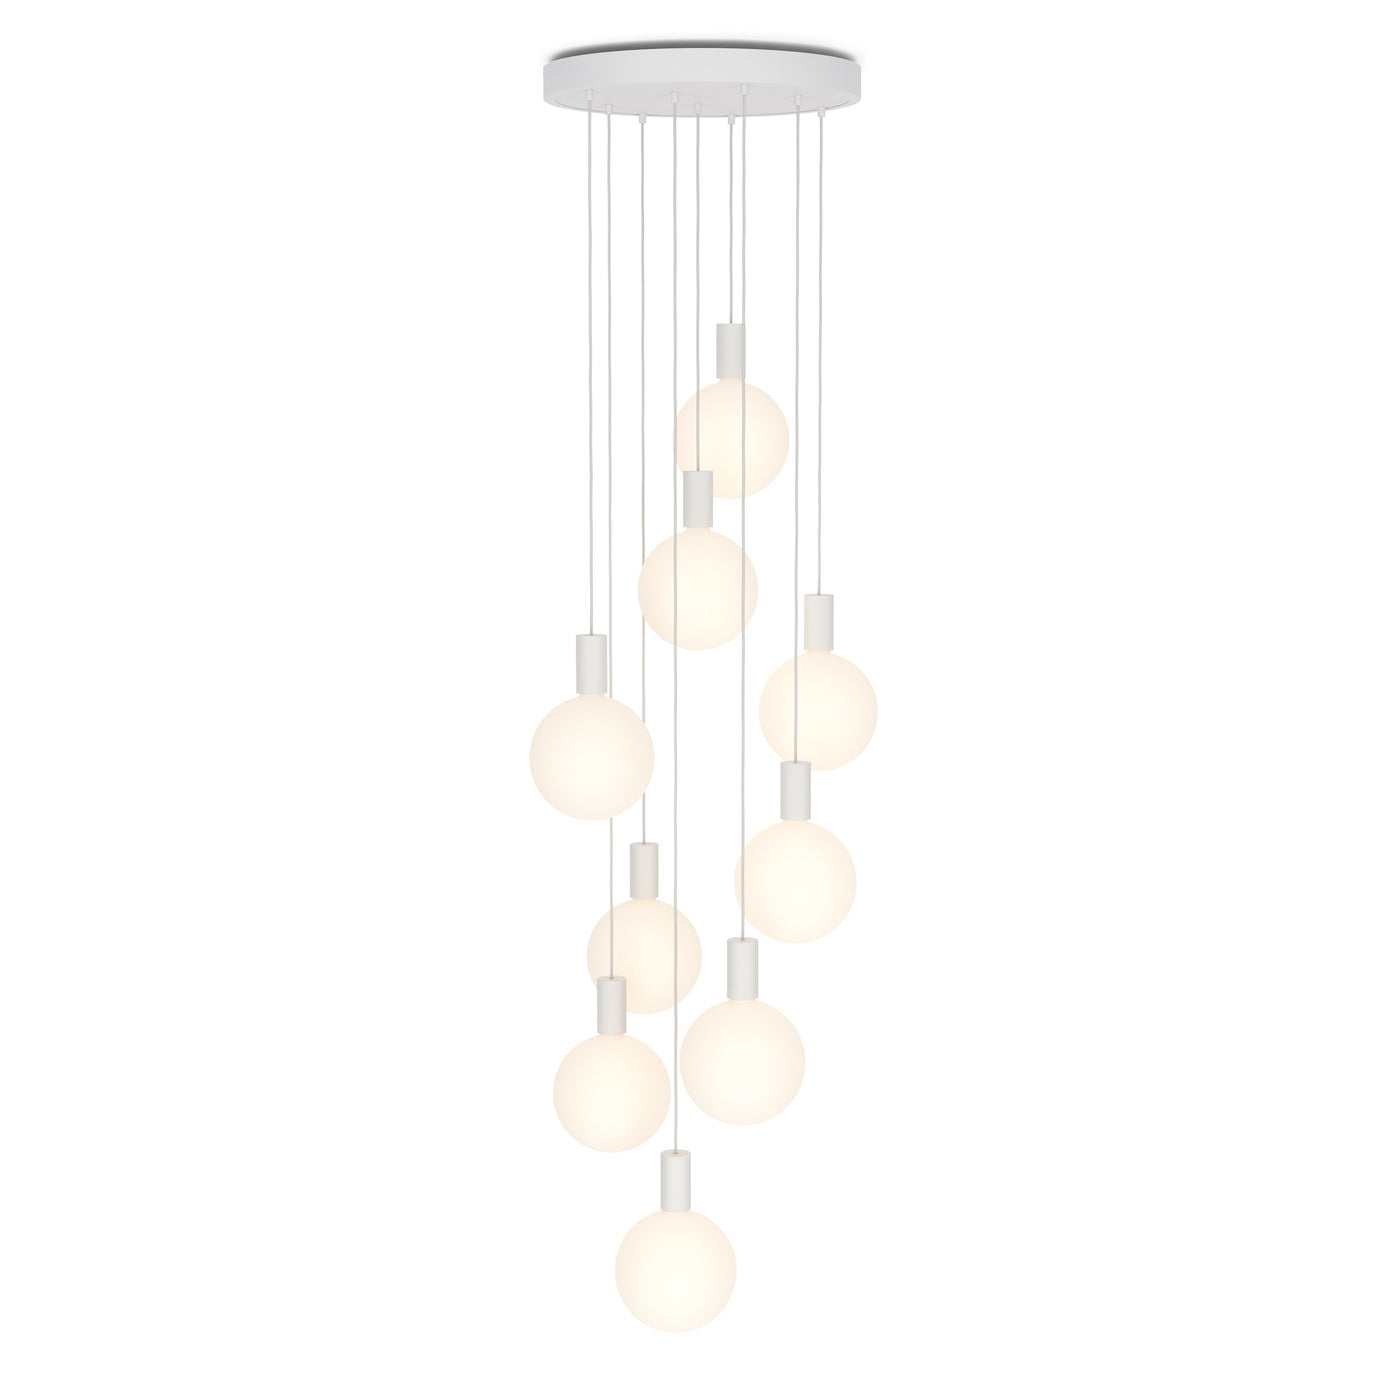 Tala Alumina Nine Pendant with Sphere V. Free + fast UK delivery from someday designs